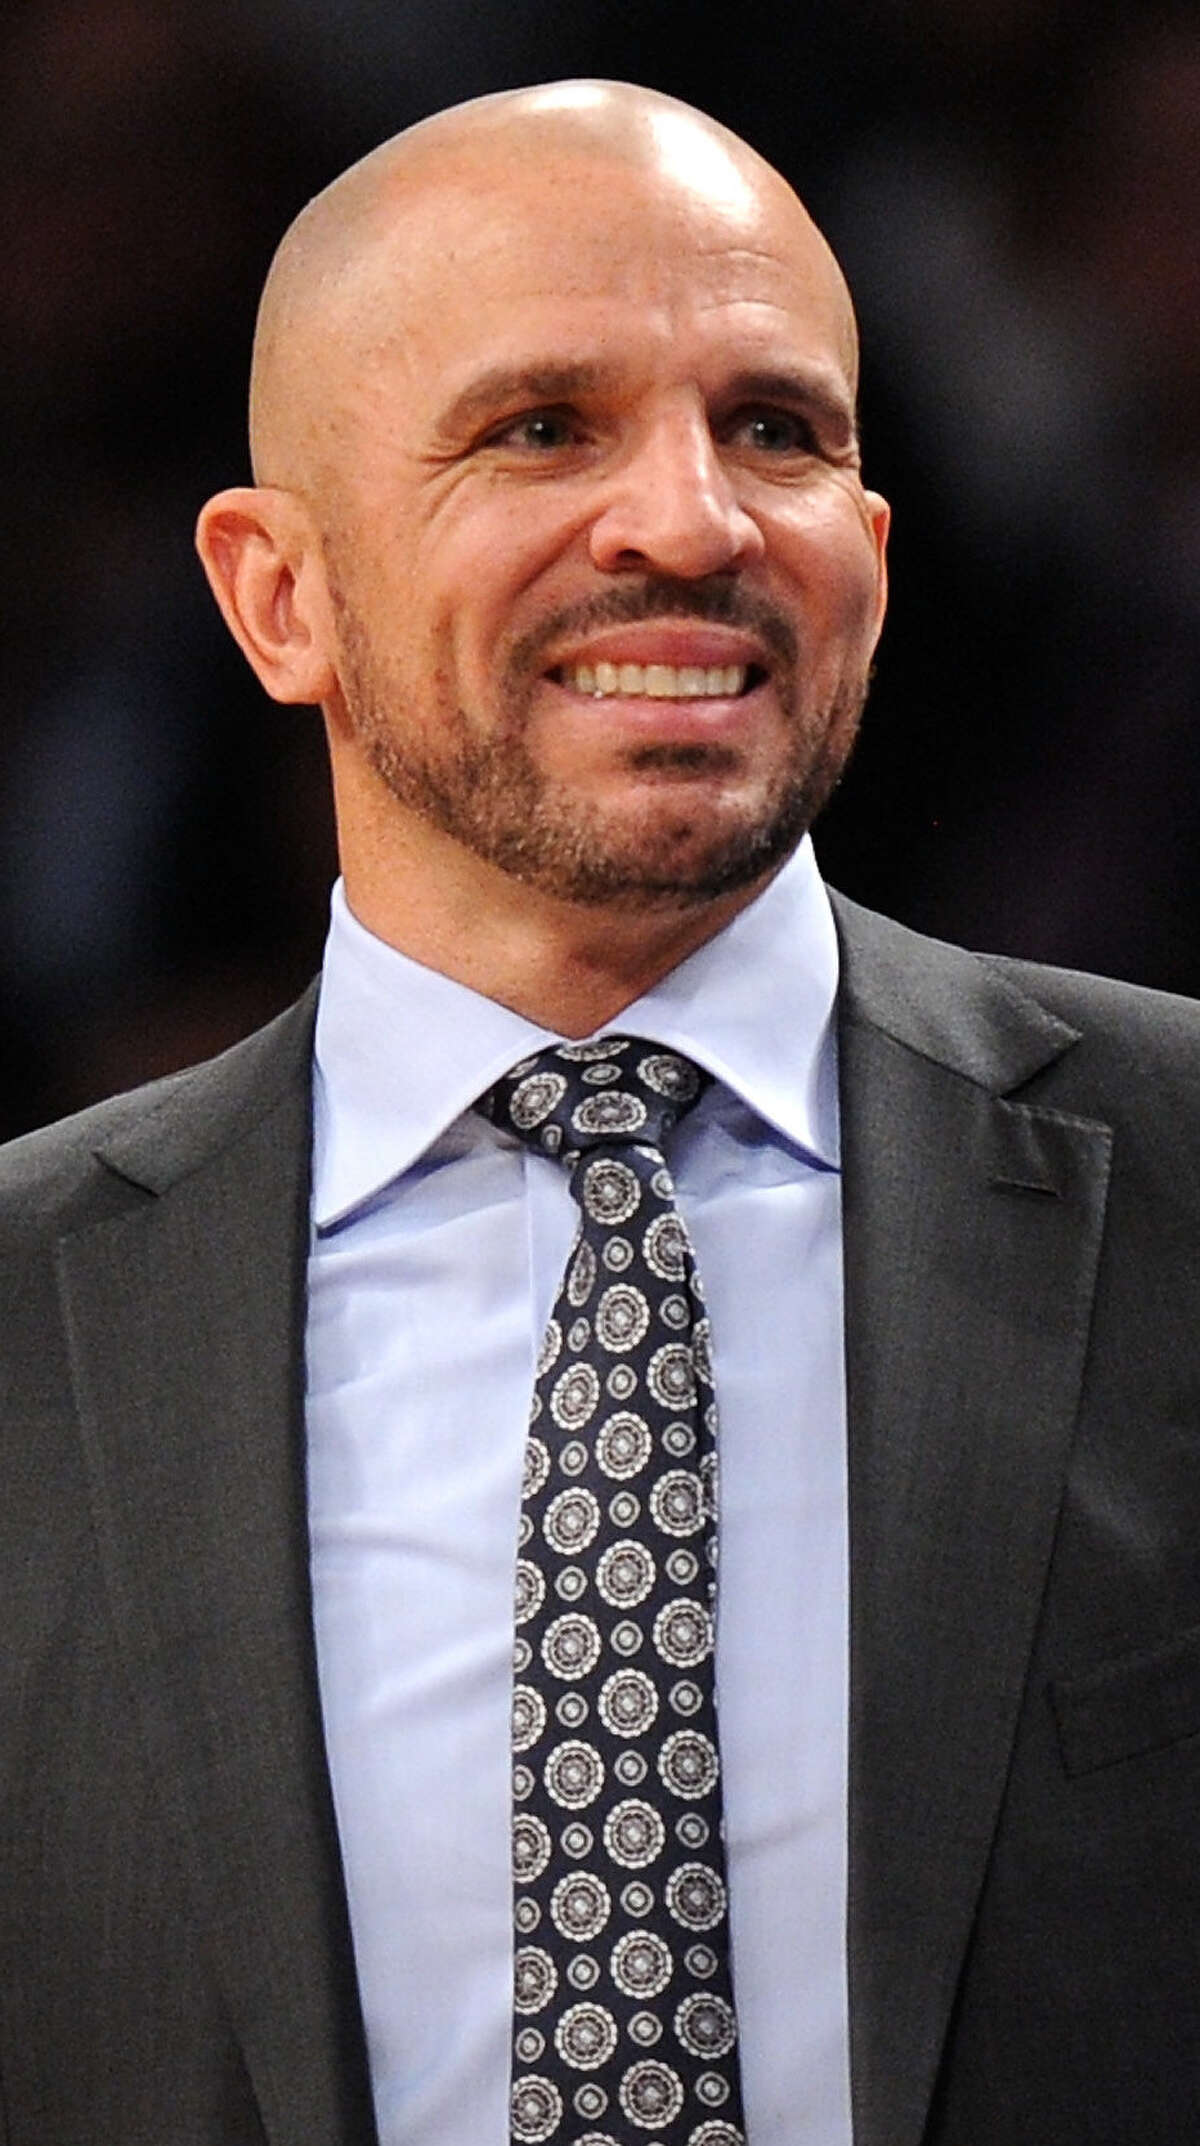 Jason Kidd went 44-38 in his only season as the Brooklyn Nets' coach, but then sought control of the basketball operations department and was denied.